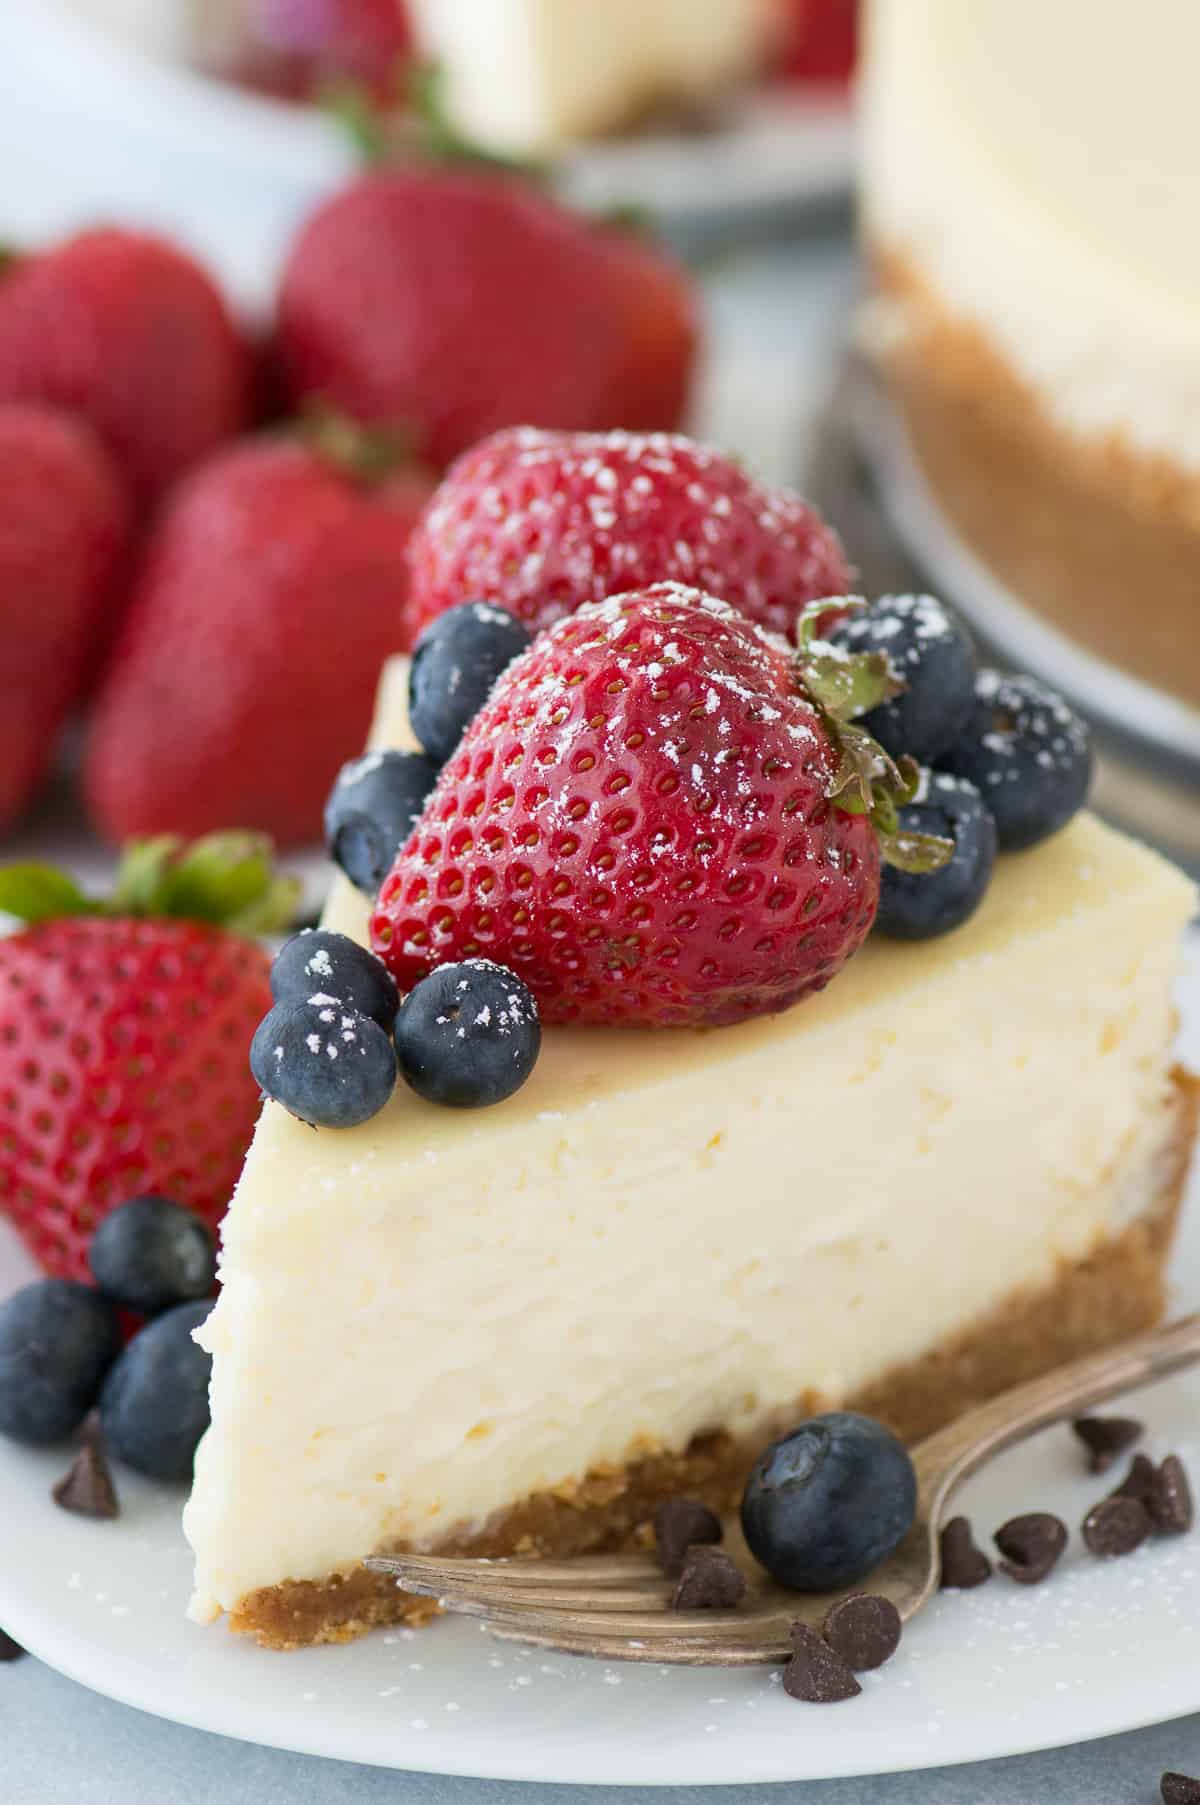 A perfect classic cheesecake recipe with a graham cracker crust! If you like cheesecake, this is the best homemade classic cheesecake!